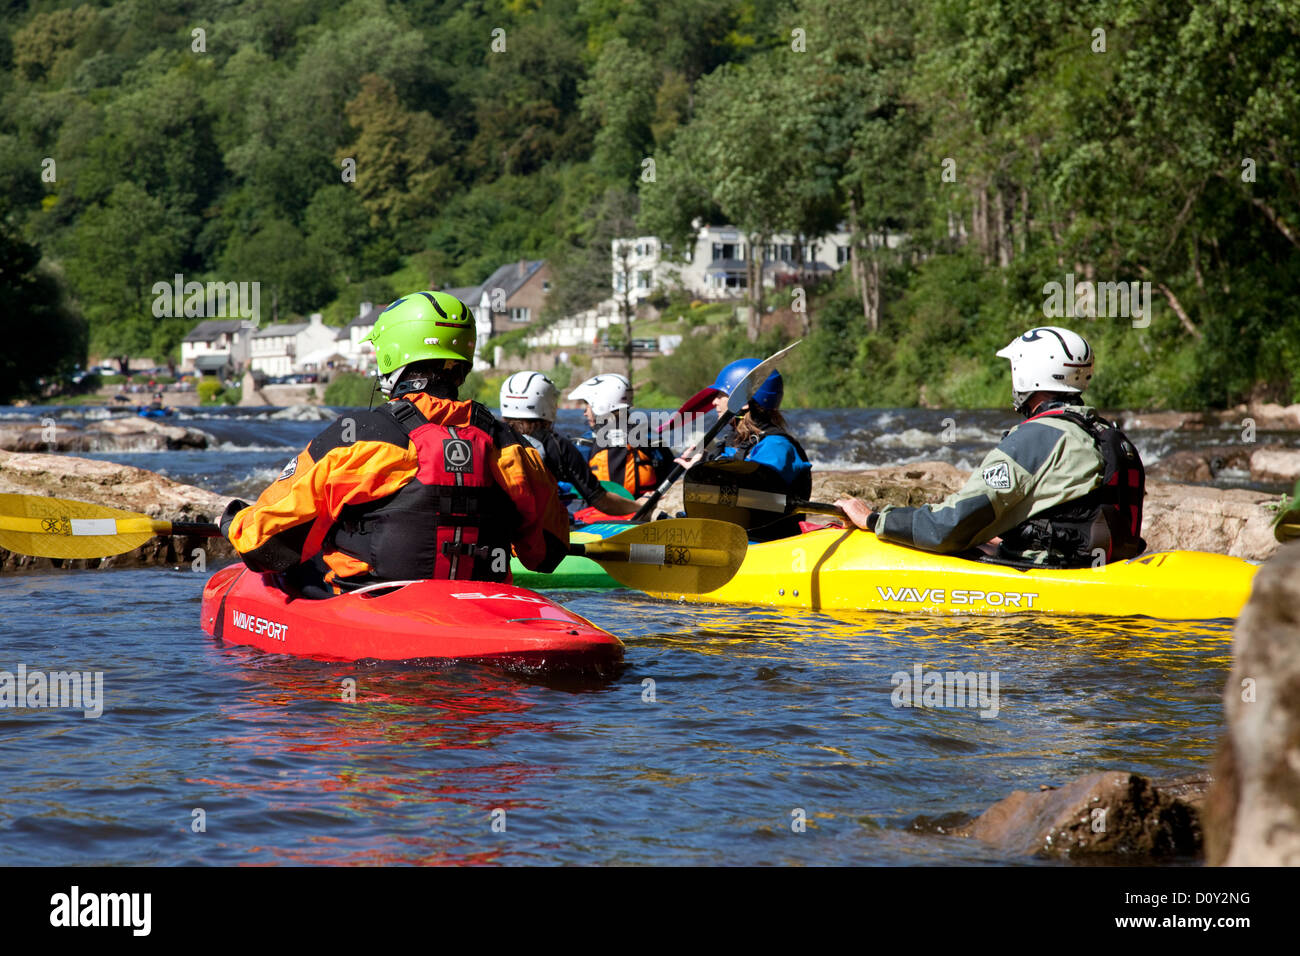 Summer kayaking on the river Wye at Symonds Yat, Wyre Valley, Ross-on-Wye, Monmouthshire, Wales Stock Photo